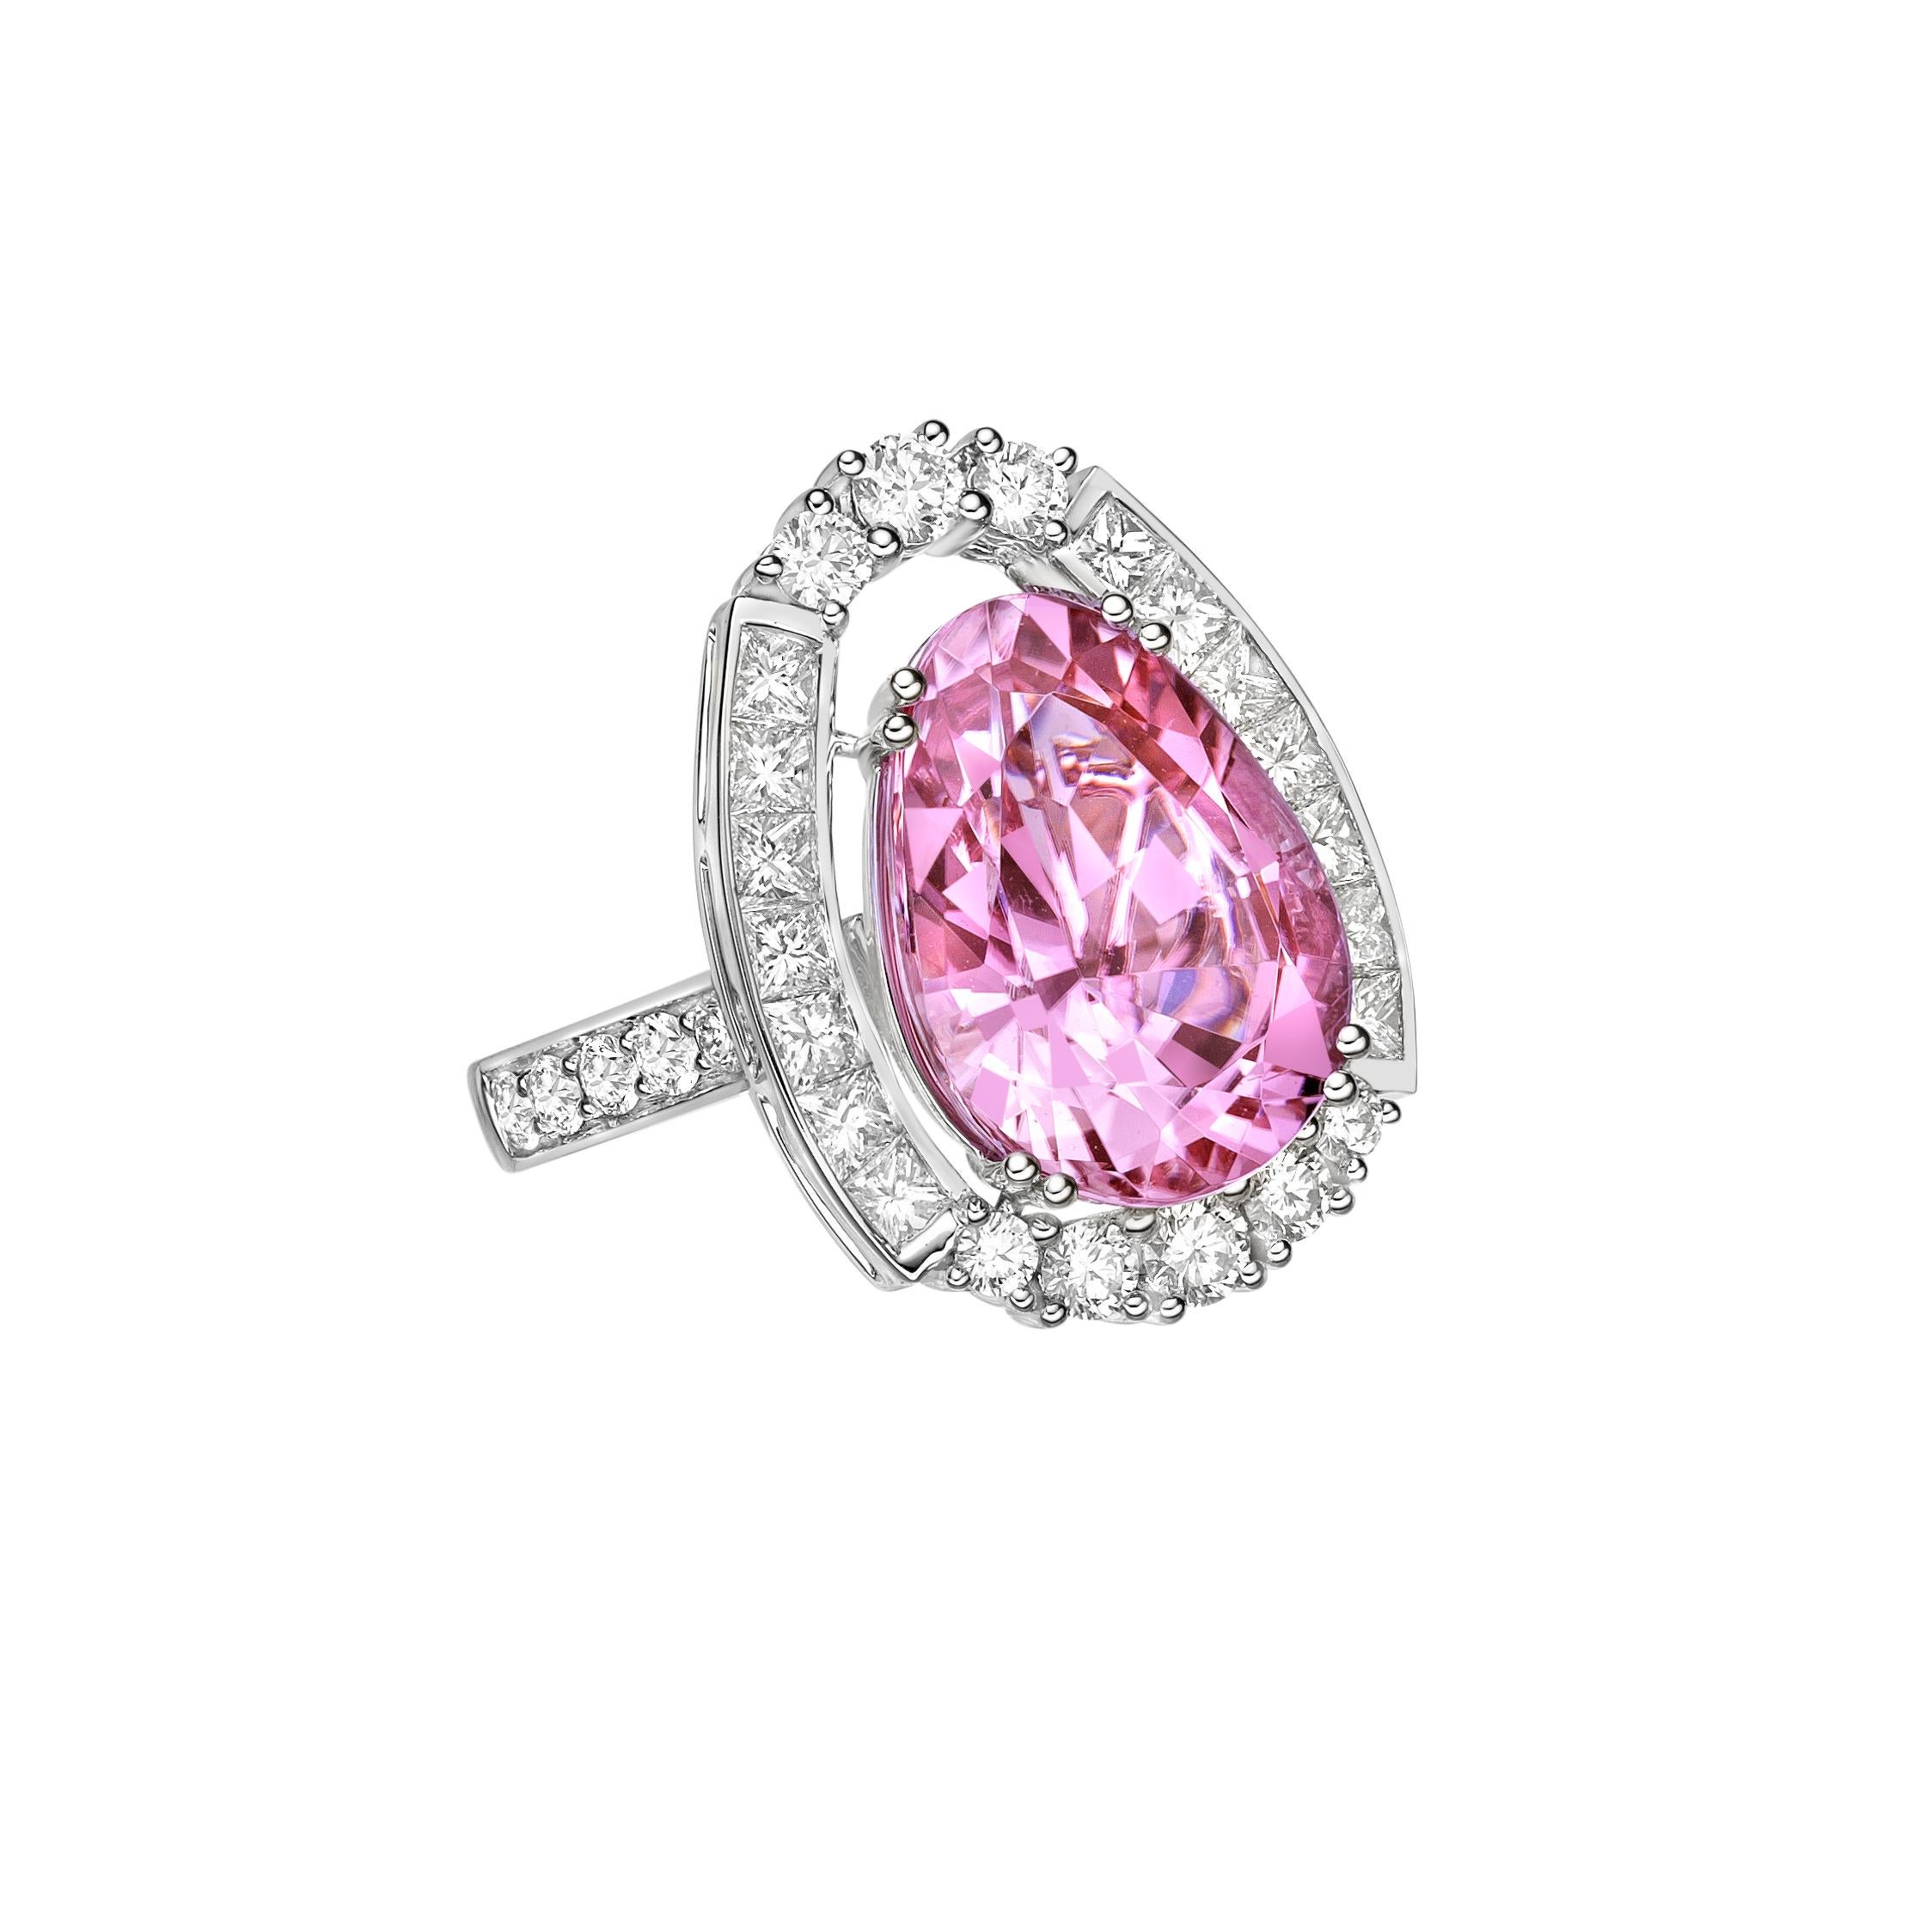 This collection features an array of Pink Tourmaline with a Pink hue that is as cool as it gets! Accented with diamonds this ring is made in white gold and present a classic yet elegant look.

Pink Tourmaline Ring in 18Karat White Gold with